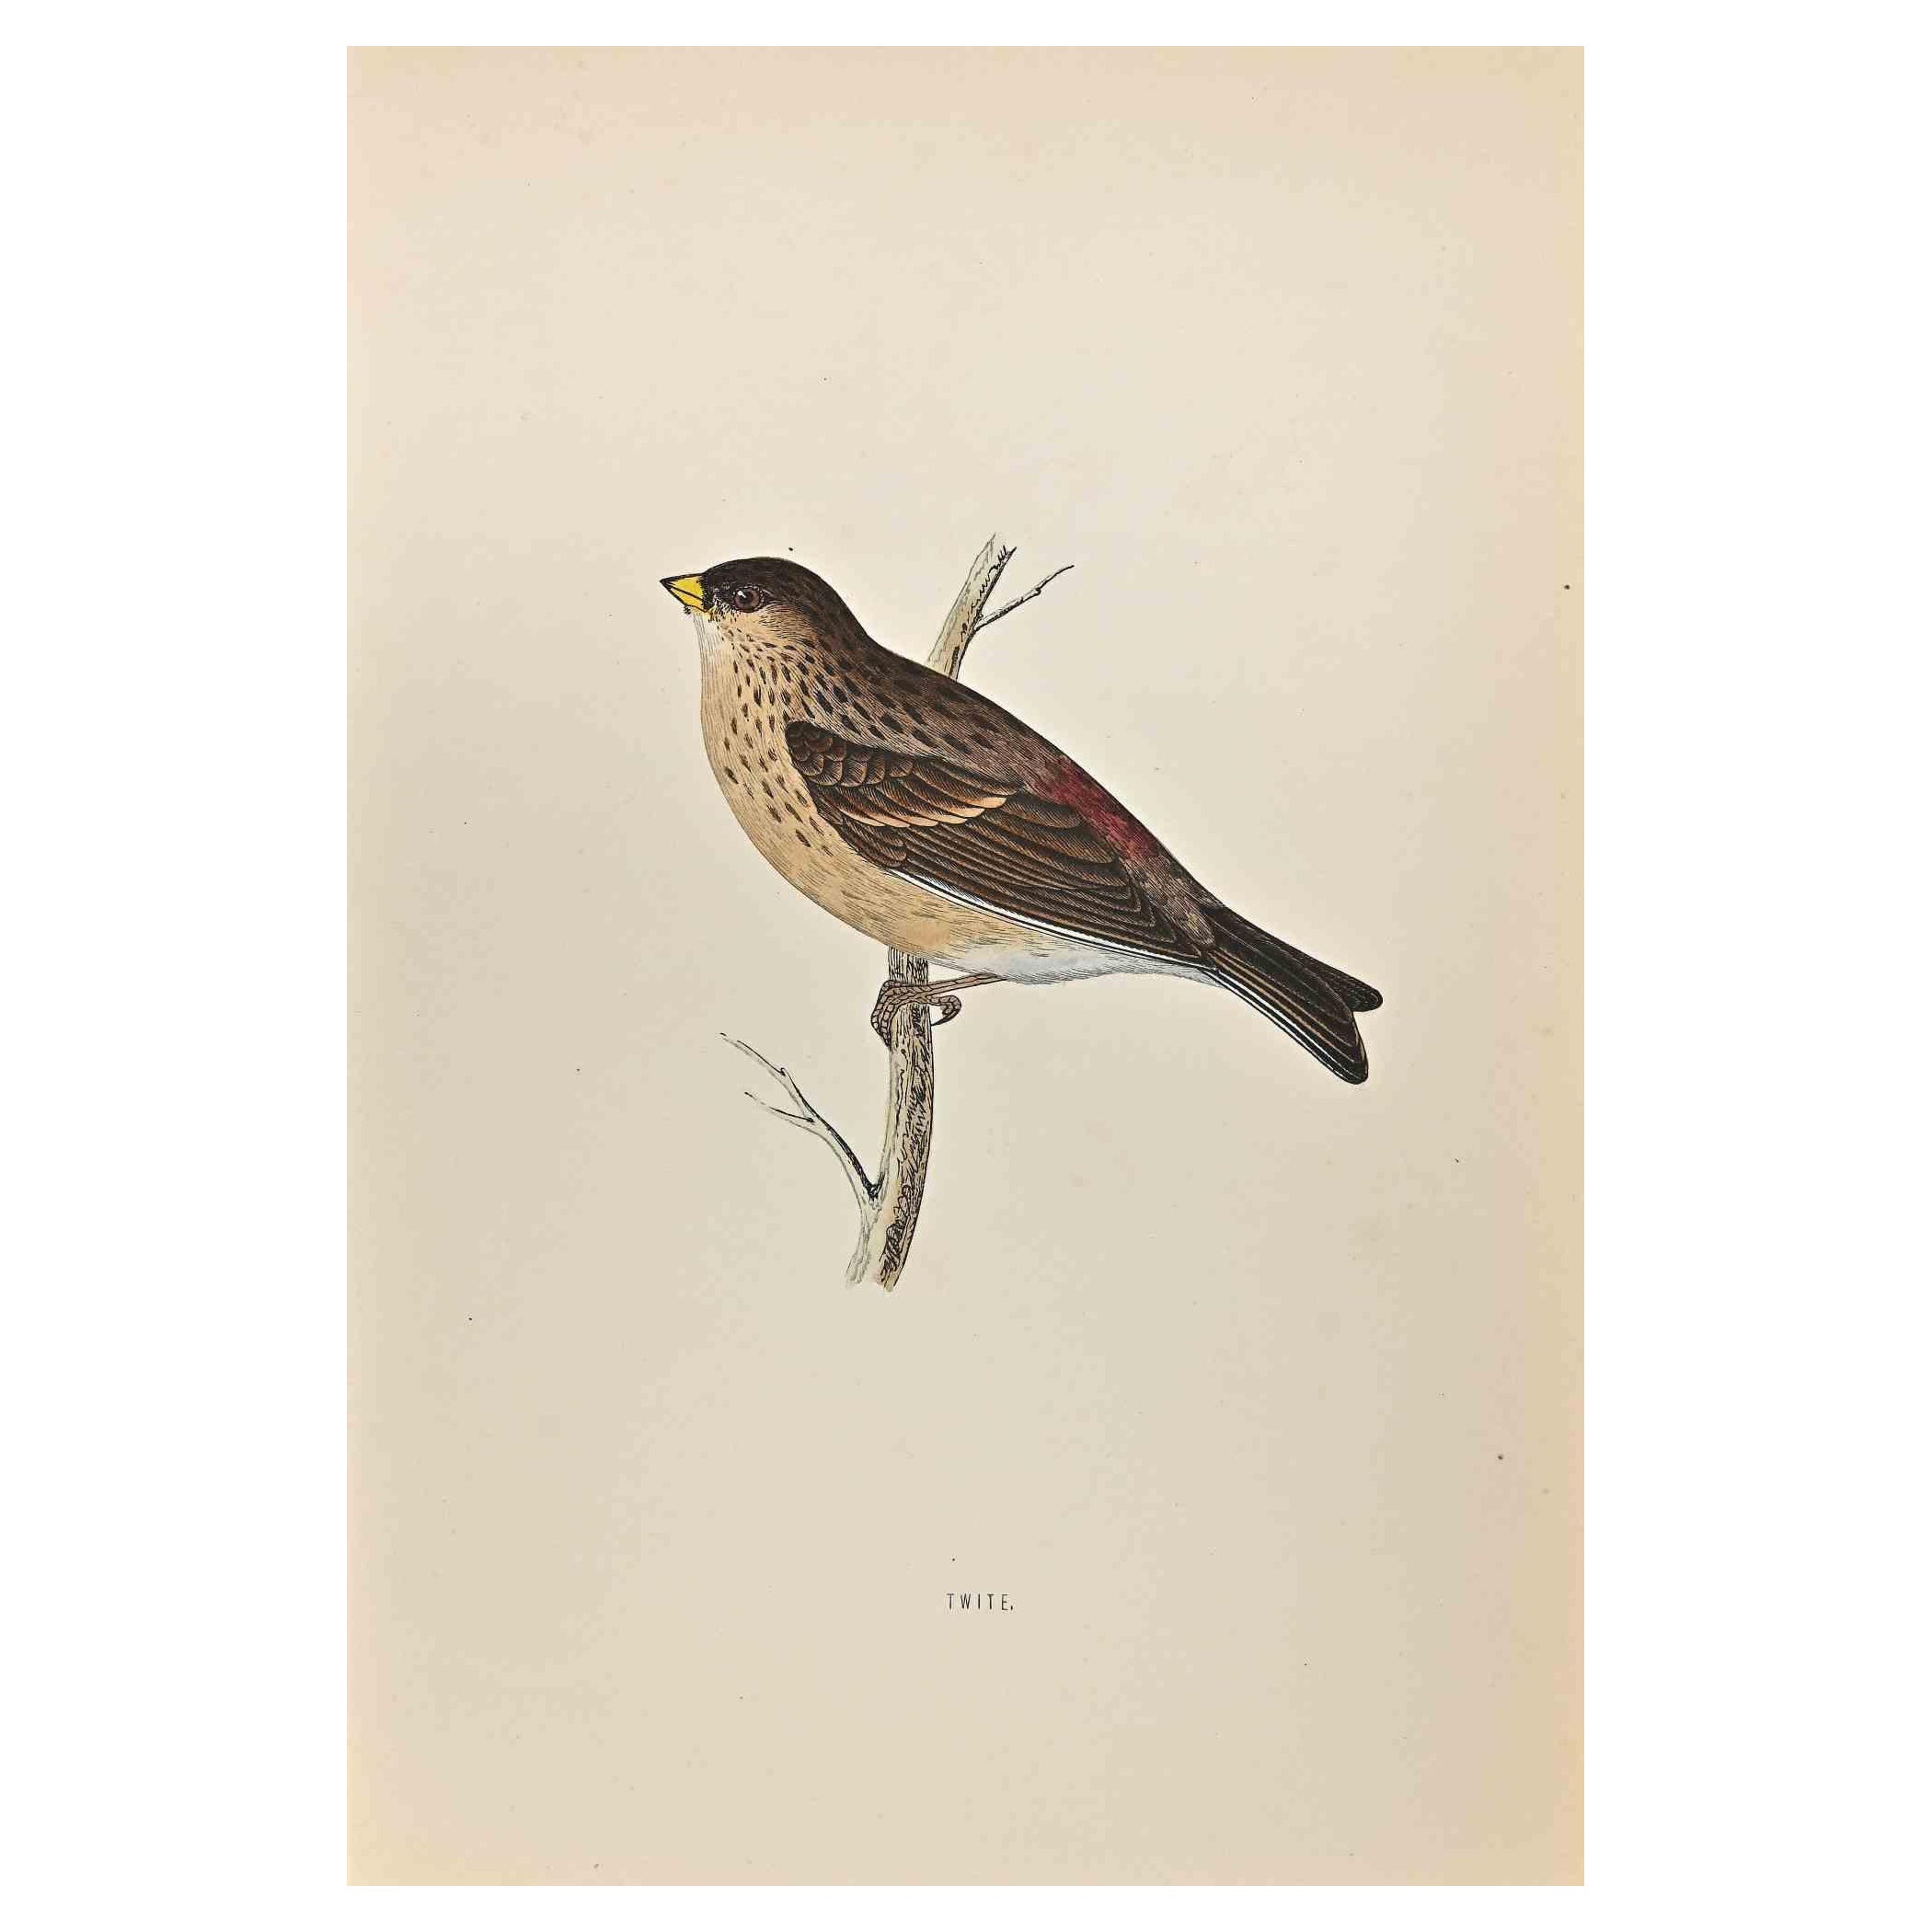 Twite is a modern artwork realized in 1870 by the British artist Alexander Francis Lydon (1836-1917) . 

Woodcut print, hand colored, published by London, Bell & Sons, 1870.  Name of the bird printed in plate. This work is part of a print suite